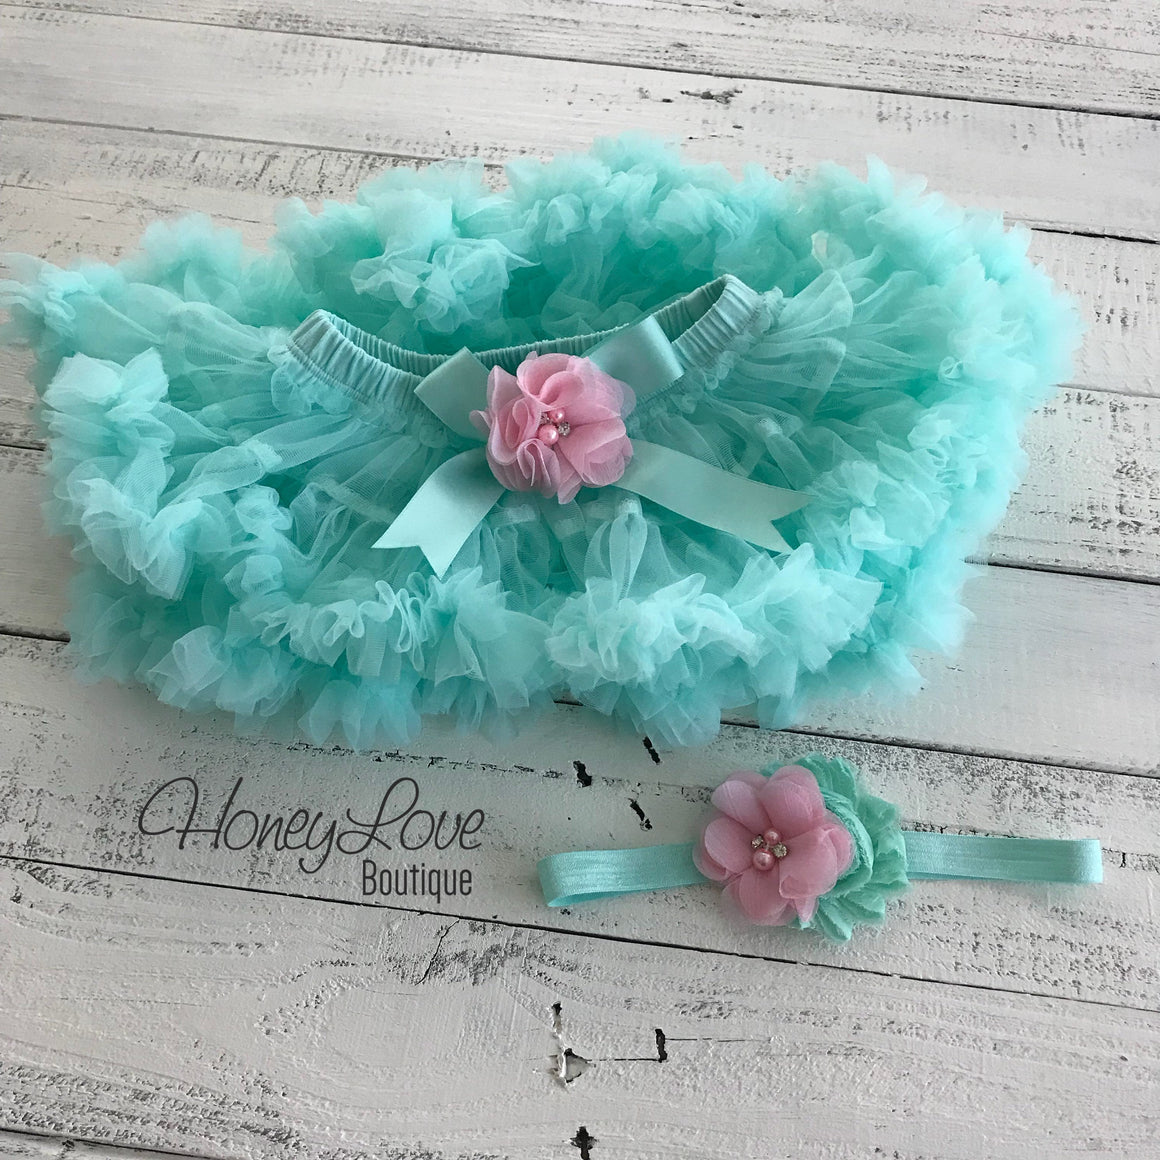 One - Birthday Outfit - Mint/Aqua, Light Pink and Silver/Gold glitter - embellished pettiskirt - HoneyLoveBoutique